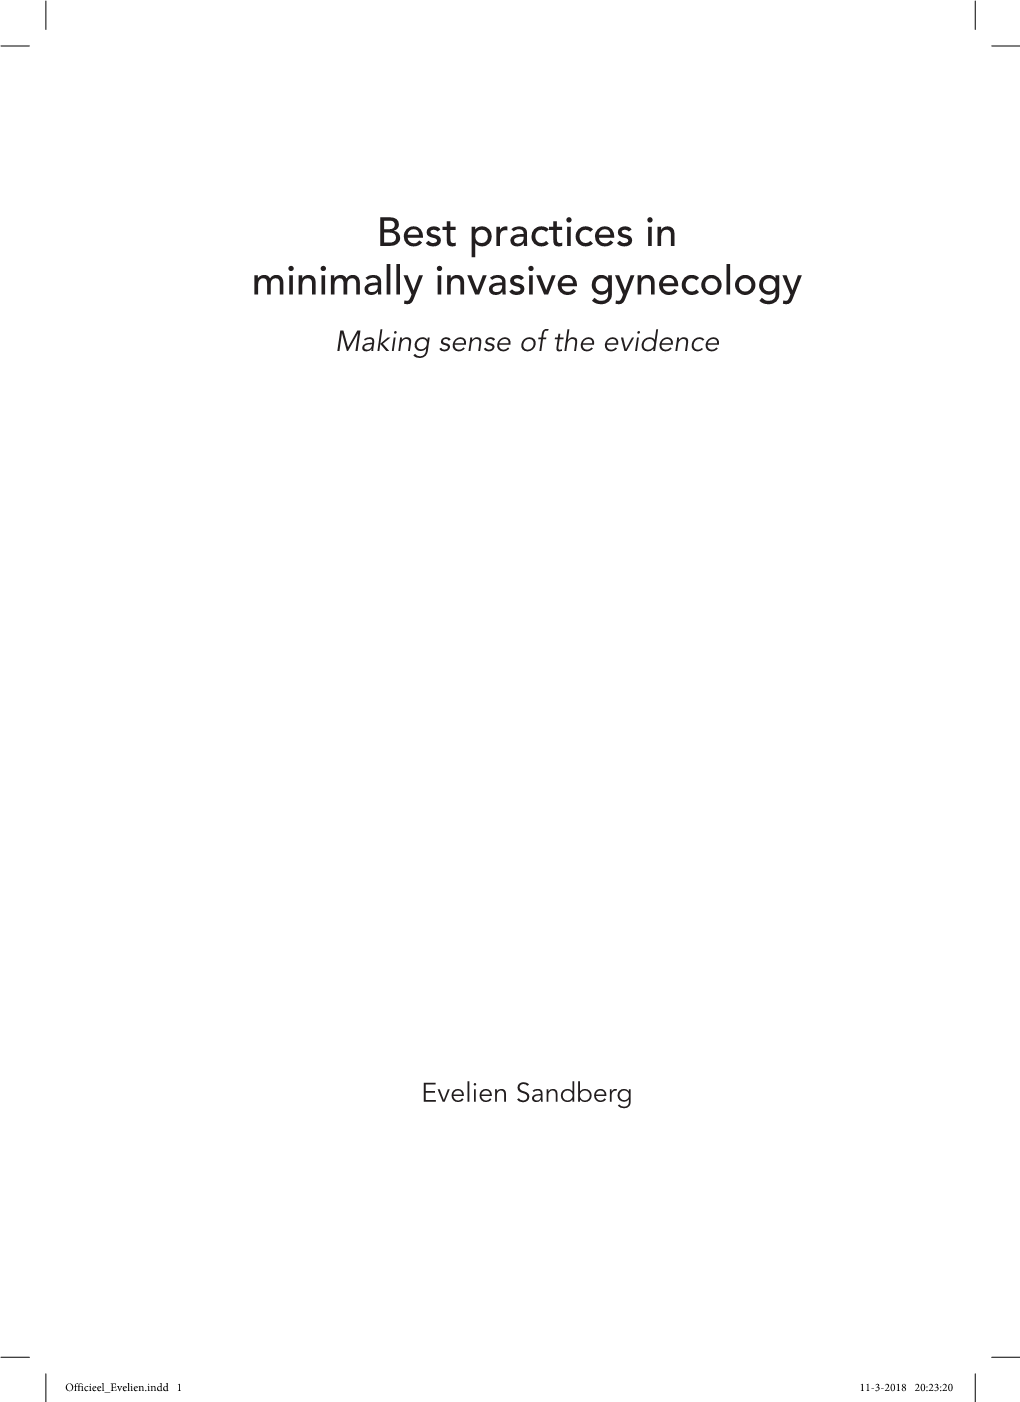 Best Practices in Minimally Invasive Gynecology Making Sense of the Evidence